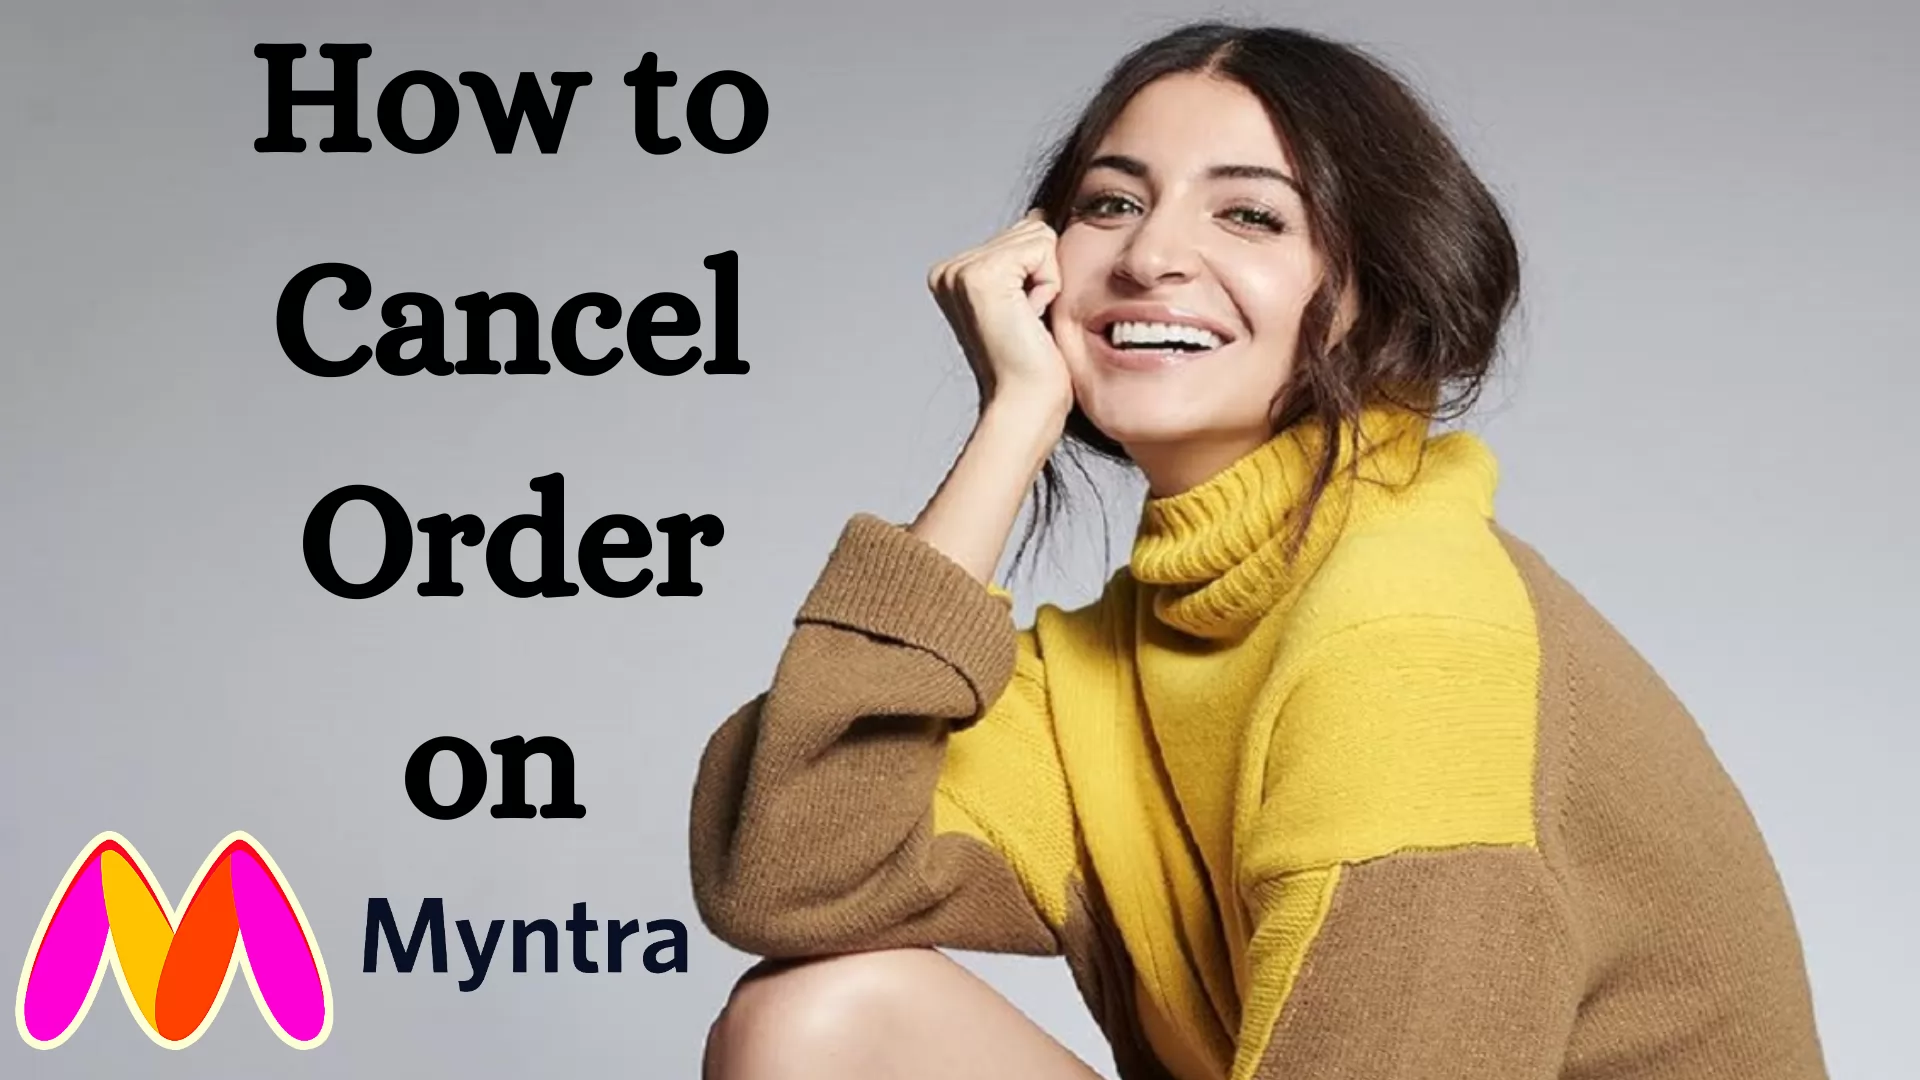 How to Cancel Order on Myntra